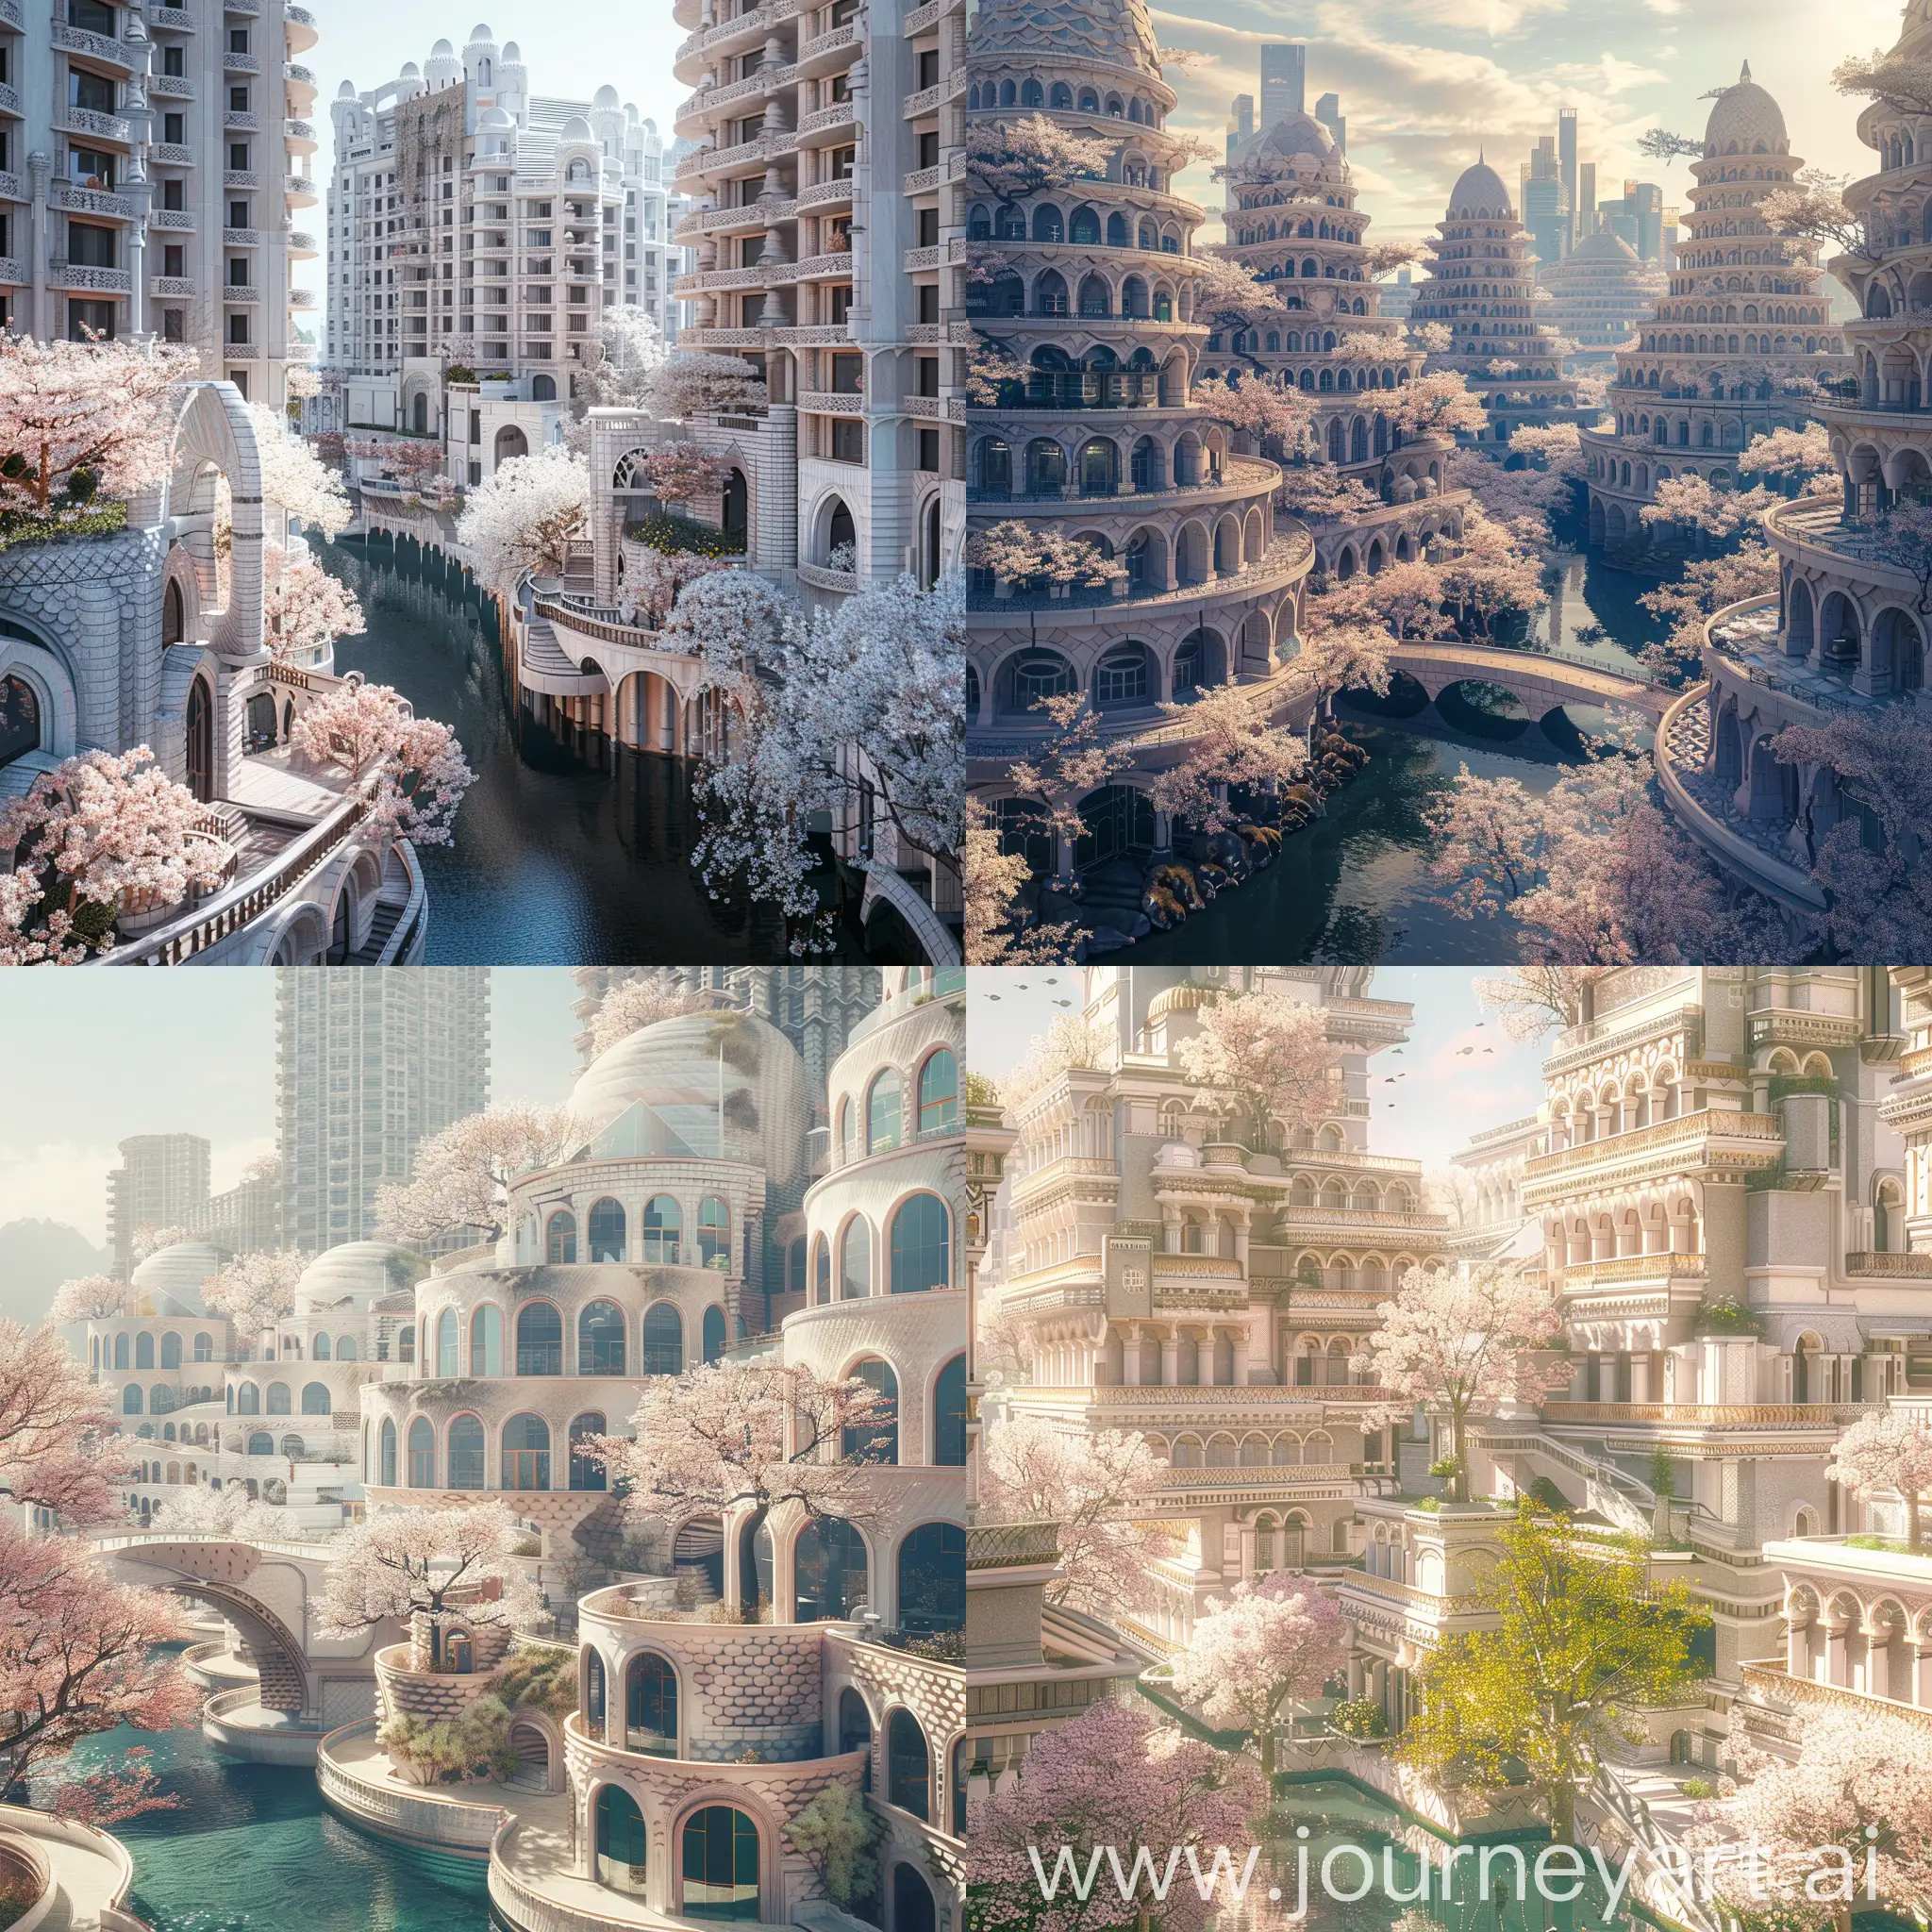 Beautiful futuristic metropolis in an alternate timeline where all buildings retain traditional elements, ornate travertine architecture with scale-like patterns on facades and blossoming trees, monumental terraced buildings, canals, Tokyo vibe, spring morning, photograph